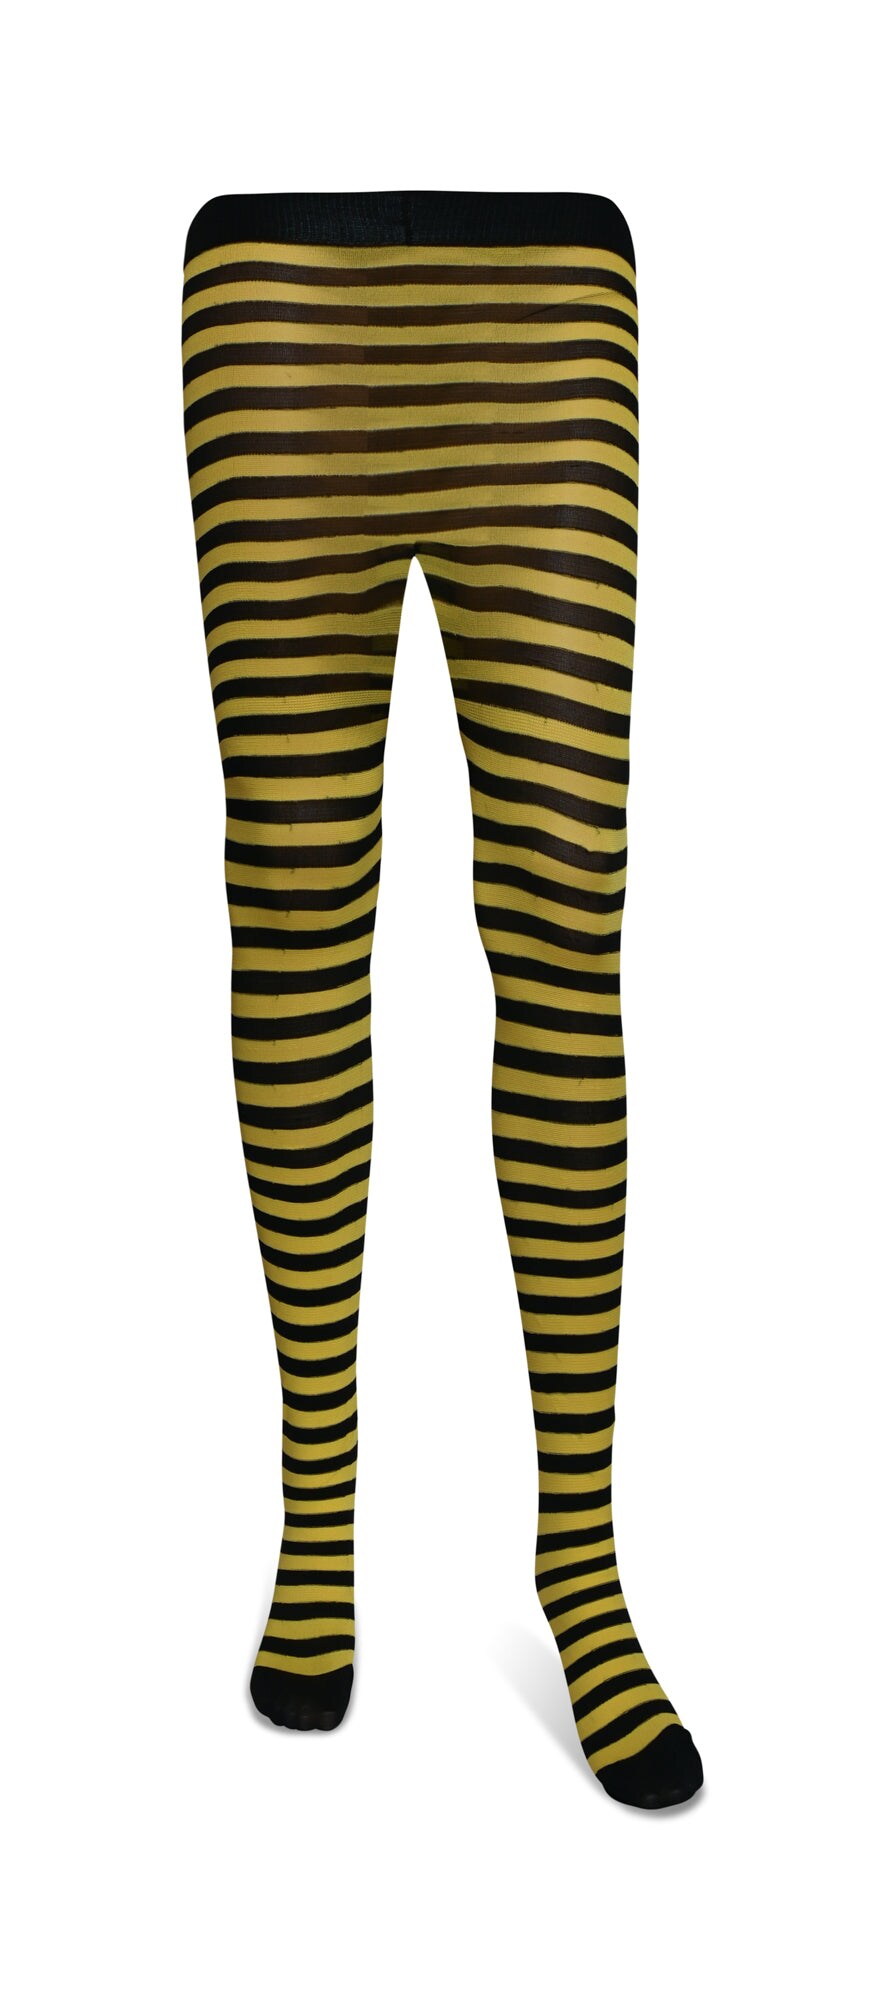 Black and Yellow Tights - Striped Nylon Bumble Bee Stretch